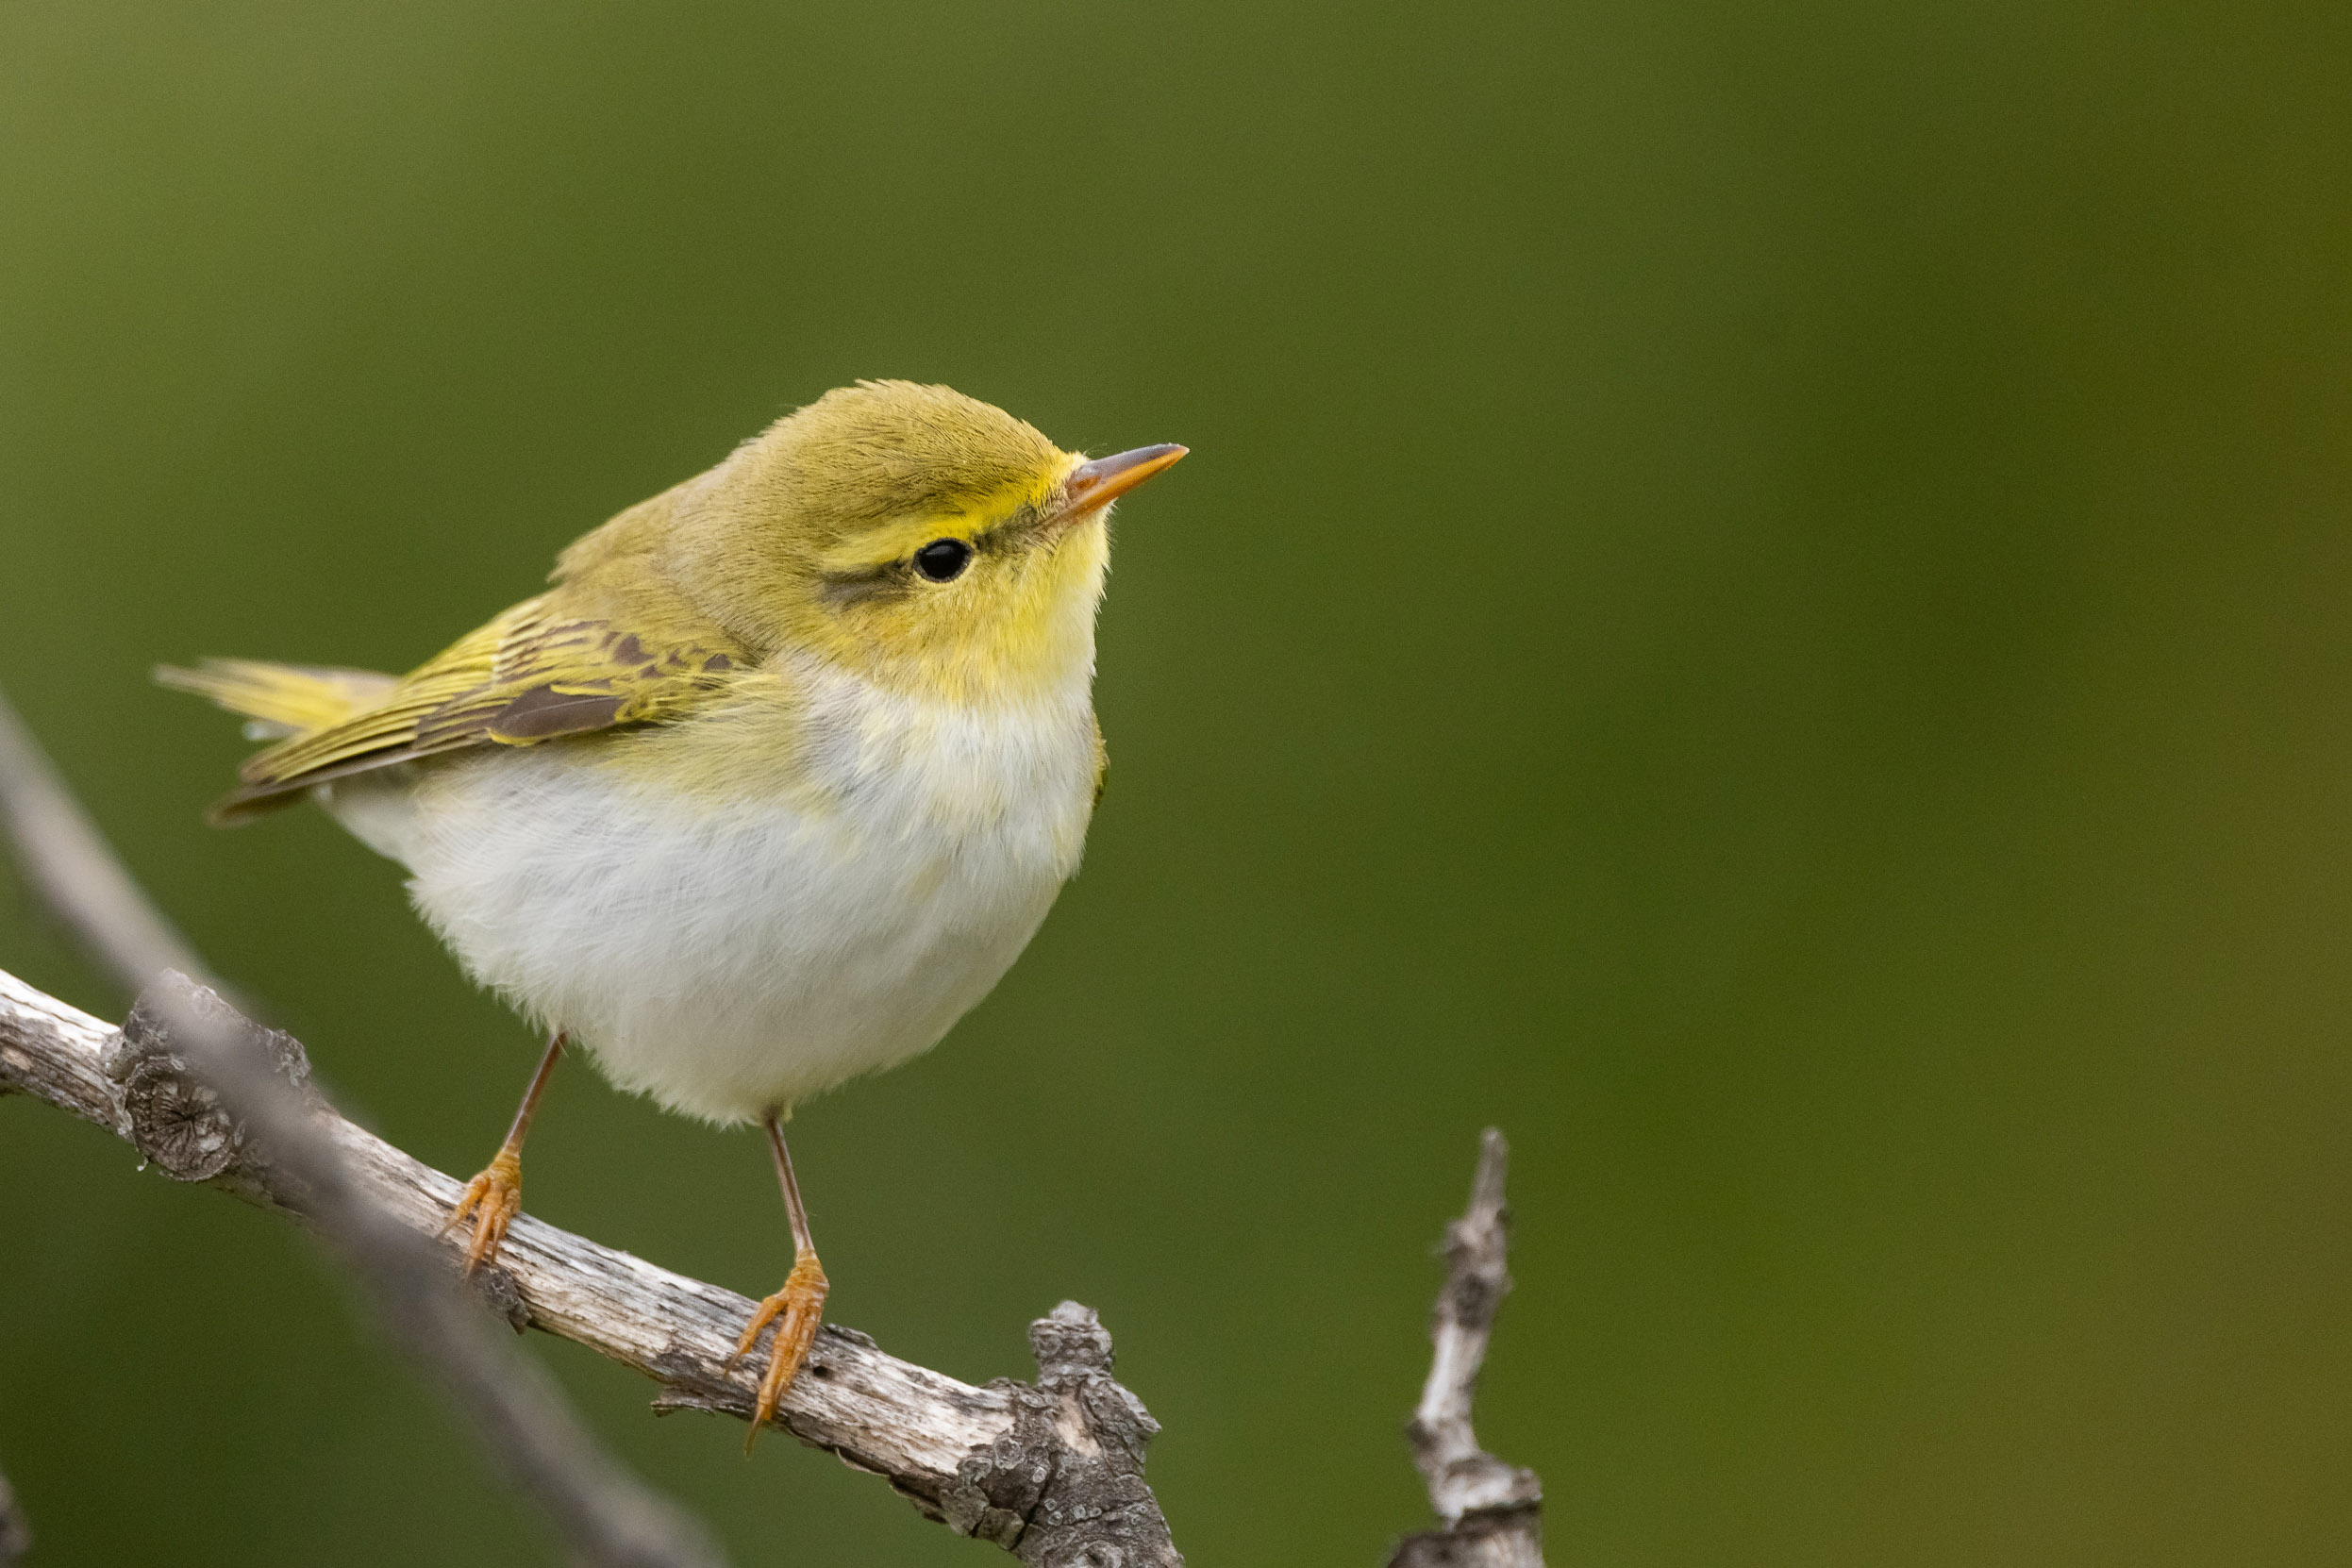 A lone Wood Warbler perched on a branch against a green background.